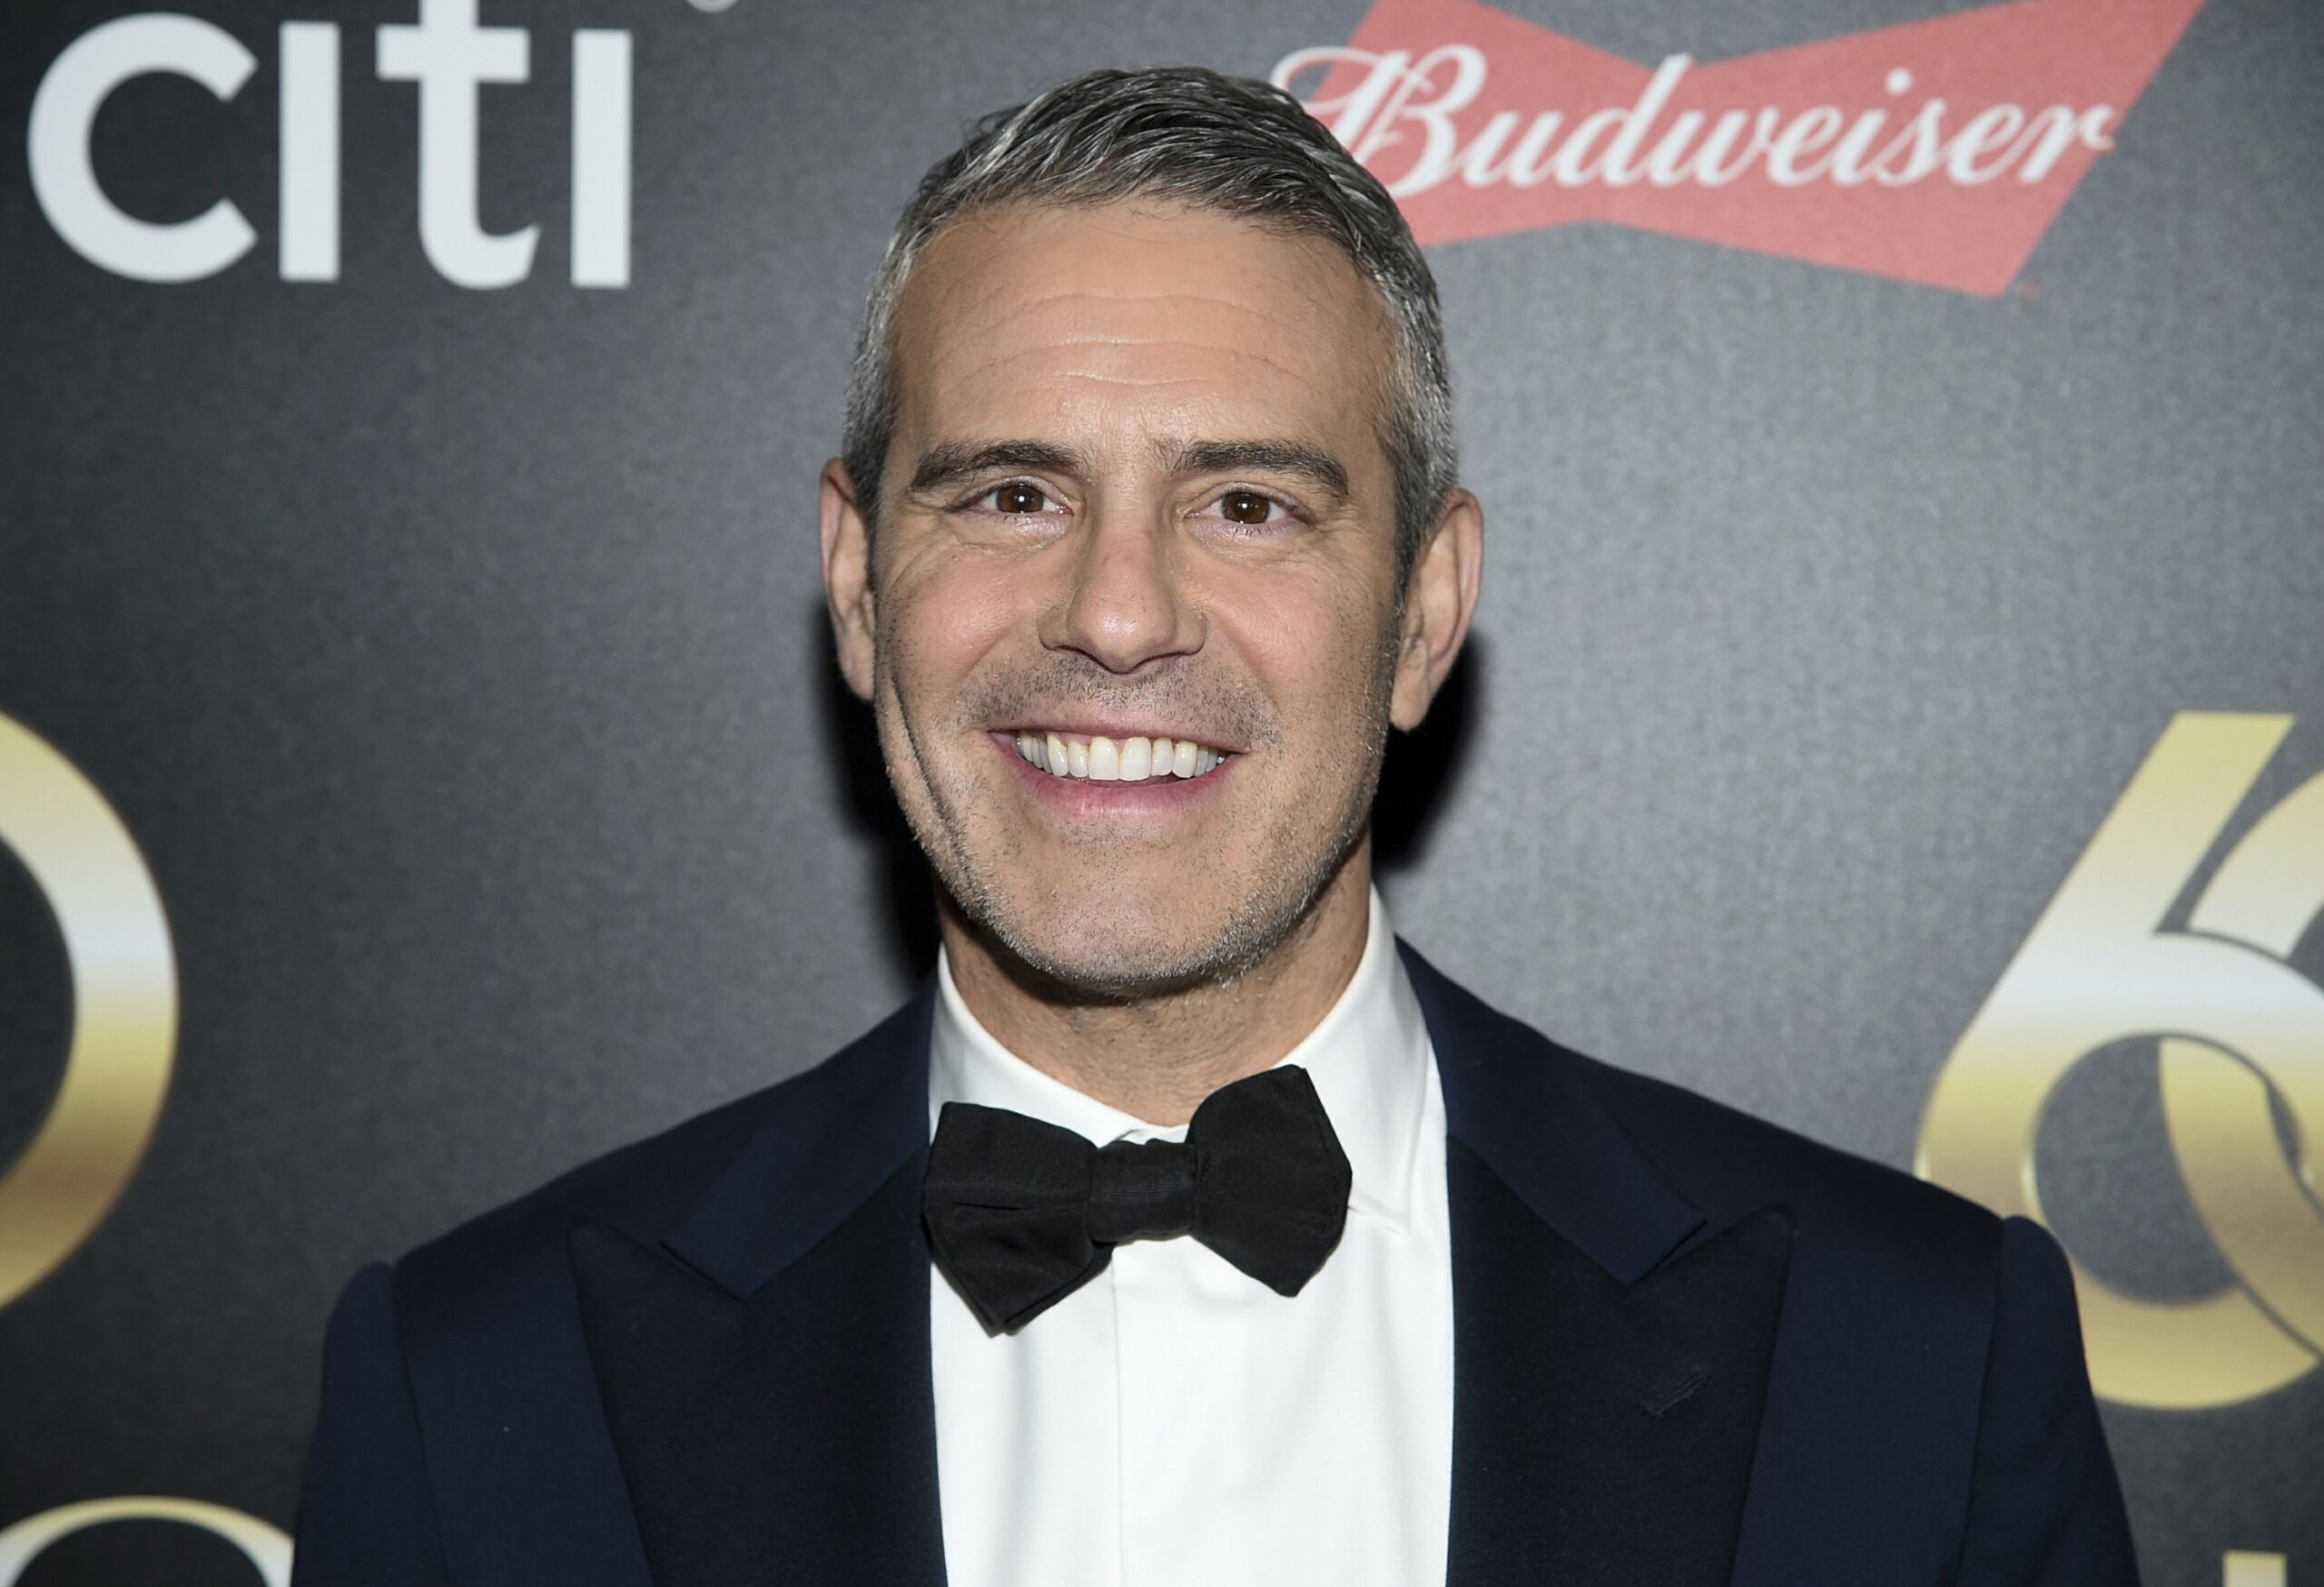 Andy Cohen Net Worth 2022 - The Event Chronicle.